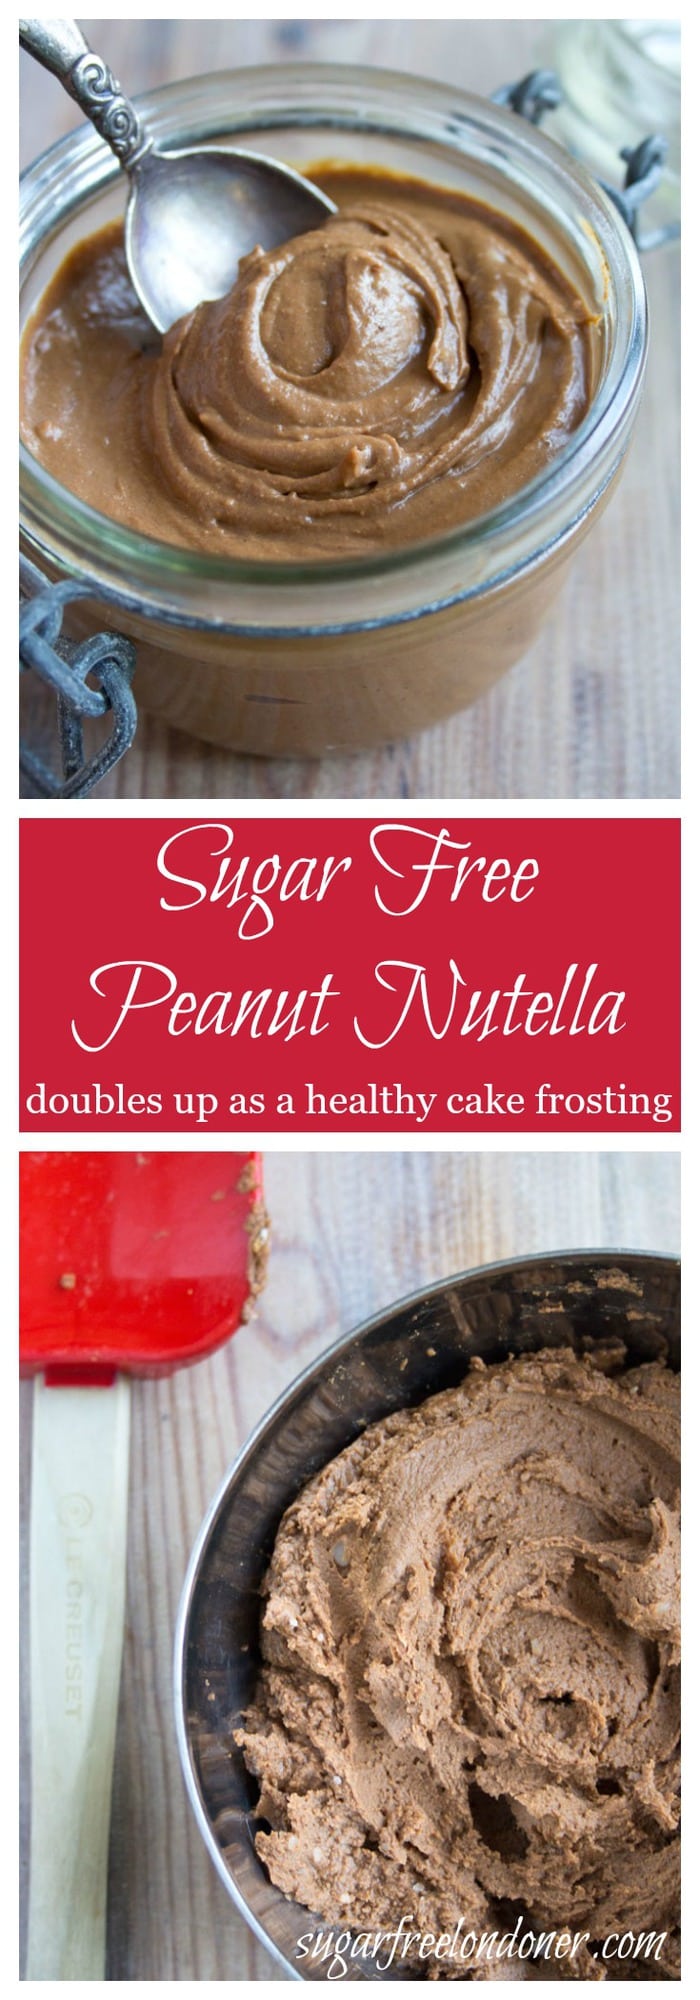 Combining two favourite breakfast spreads into one: This healthy sugar free peanut nutella is so simple to make and great on bread or waffles. With a small adjustment, you can turn it into a delicious cake frosting.